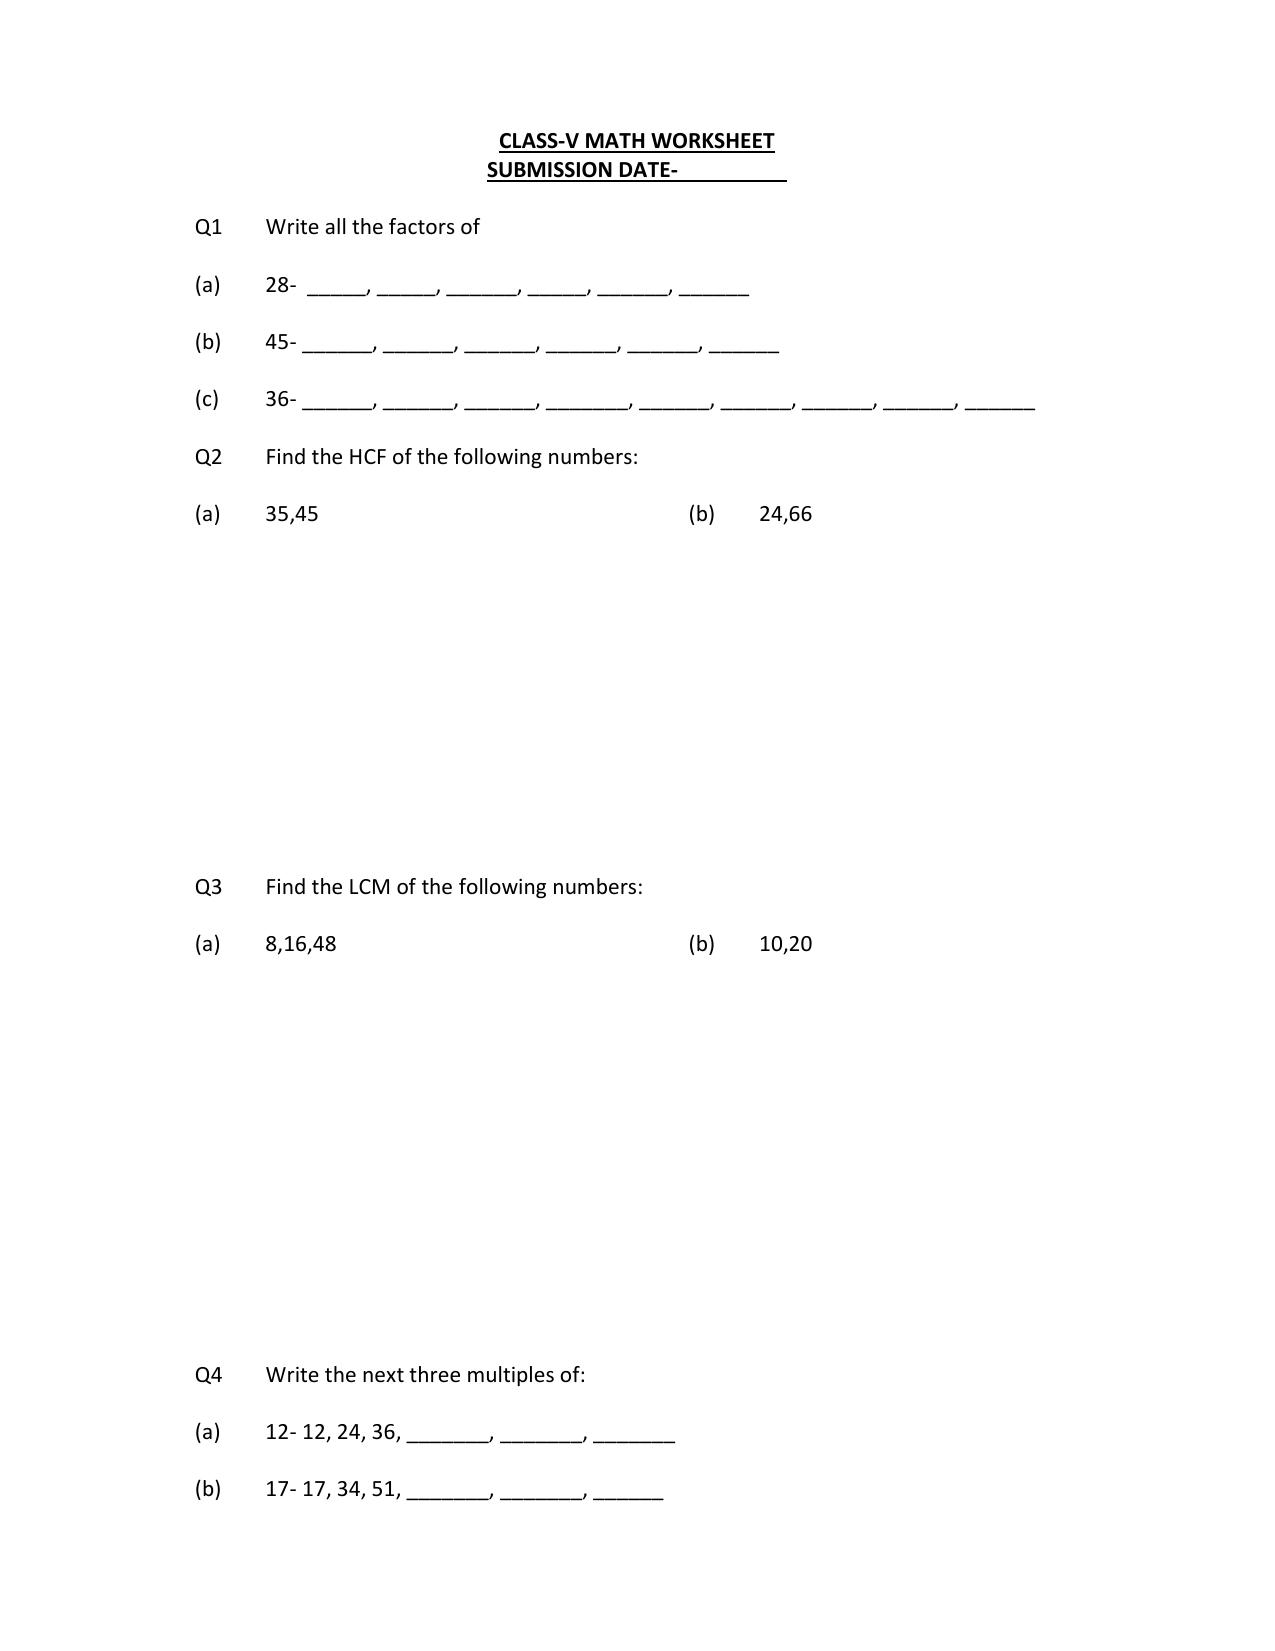 Worksheet for Class 5 Maths Factors Assignment 1 - Page 1